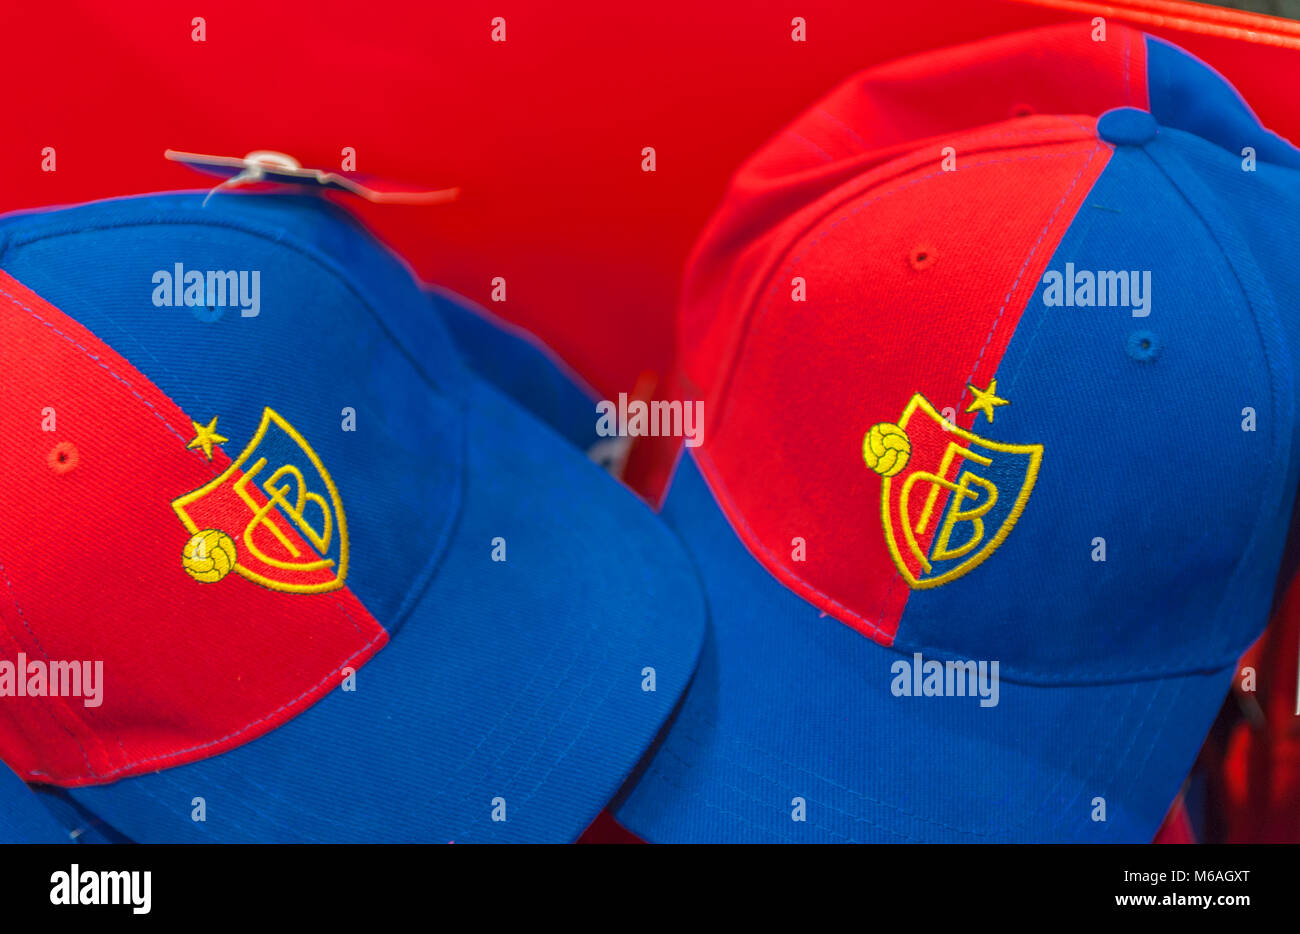 Caps with emblem on sale in the fans hop of FC Basel Stock Photo - Alamy